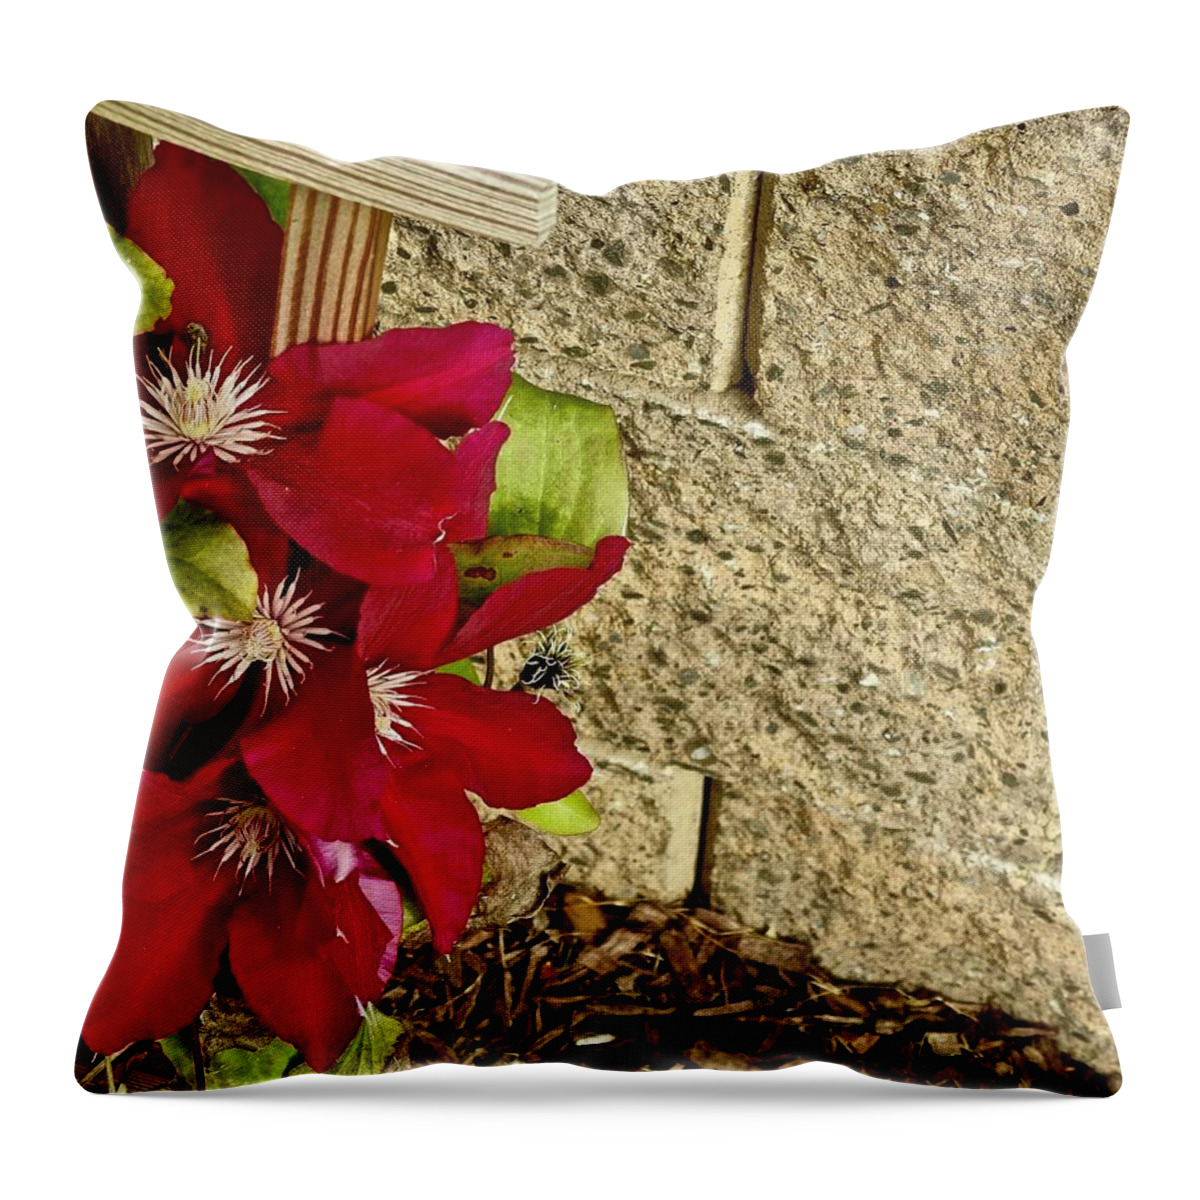 Clematis Throw Pillow featuring the photograph Red Clematis by Kathy Chism